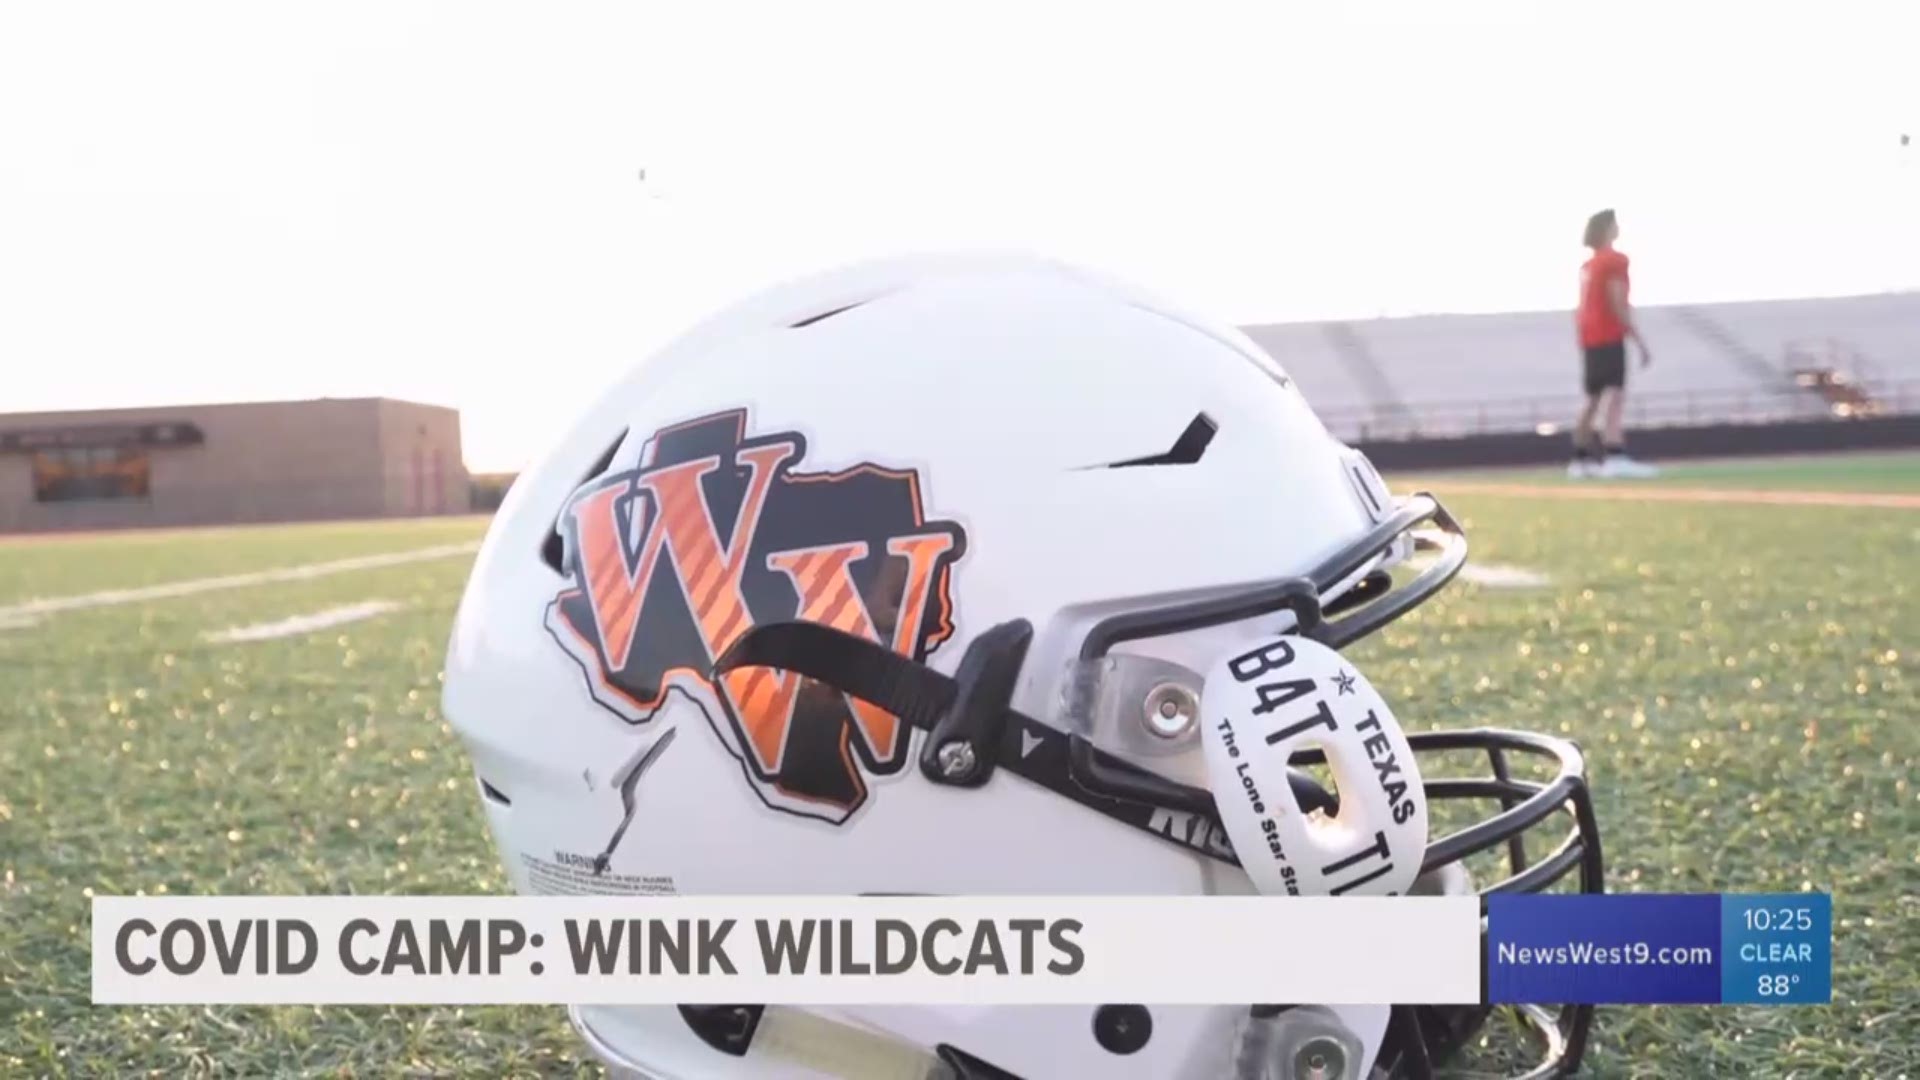 Behind their star duo of brothers the Wink Wildcats are hoping to capture a district title